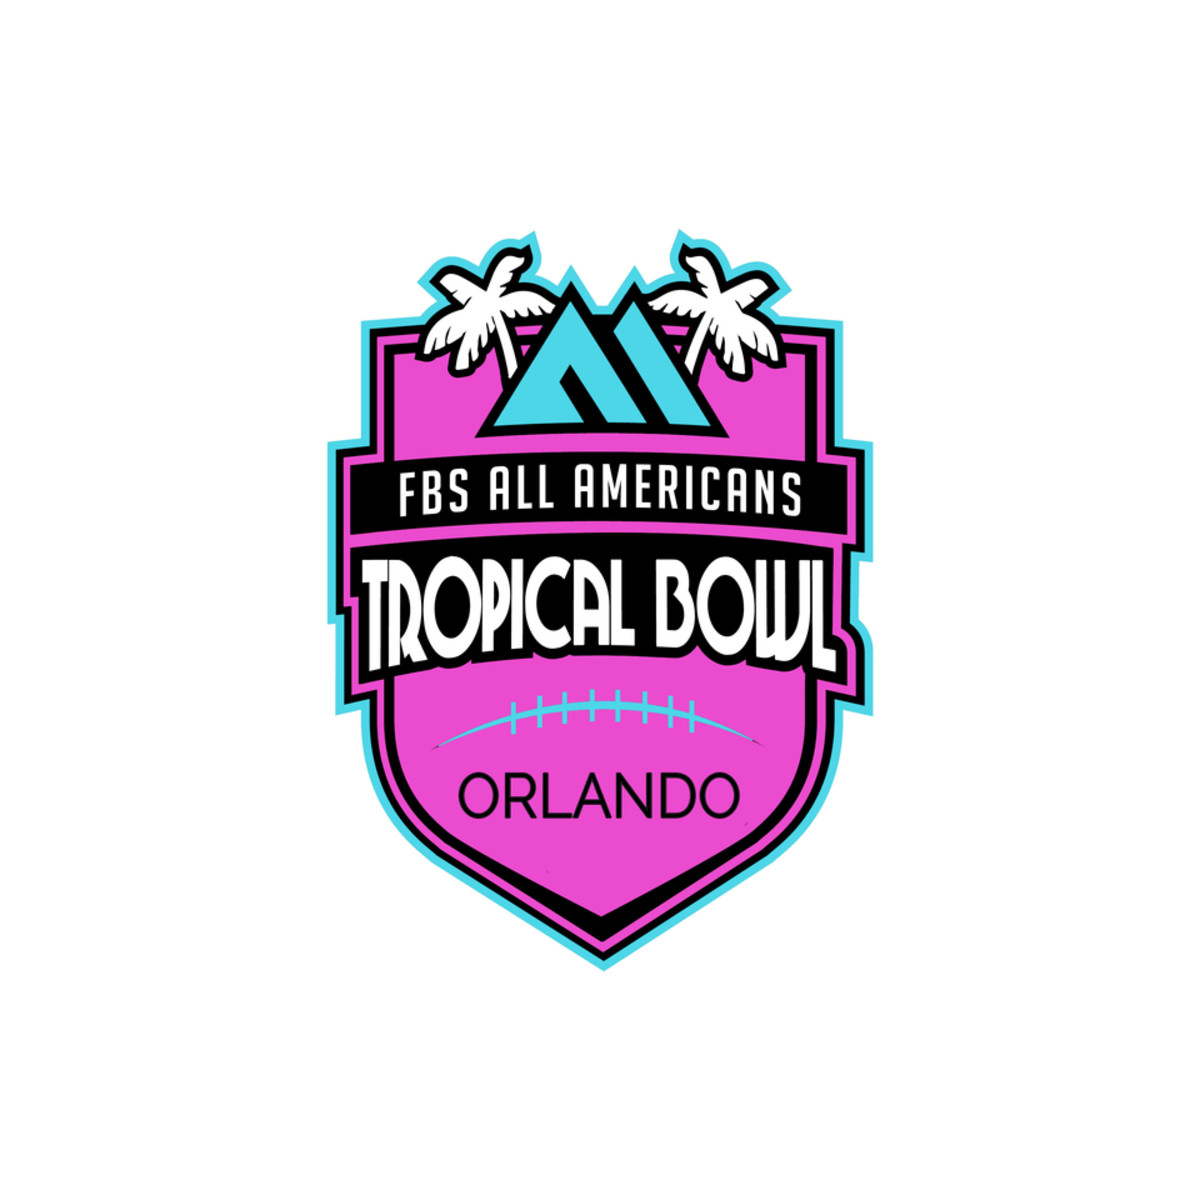 Tropical Bowl All-Star Game